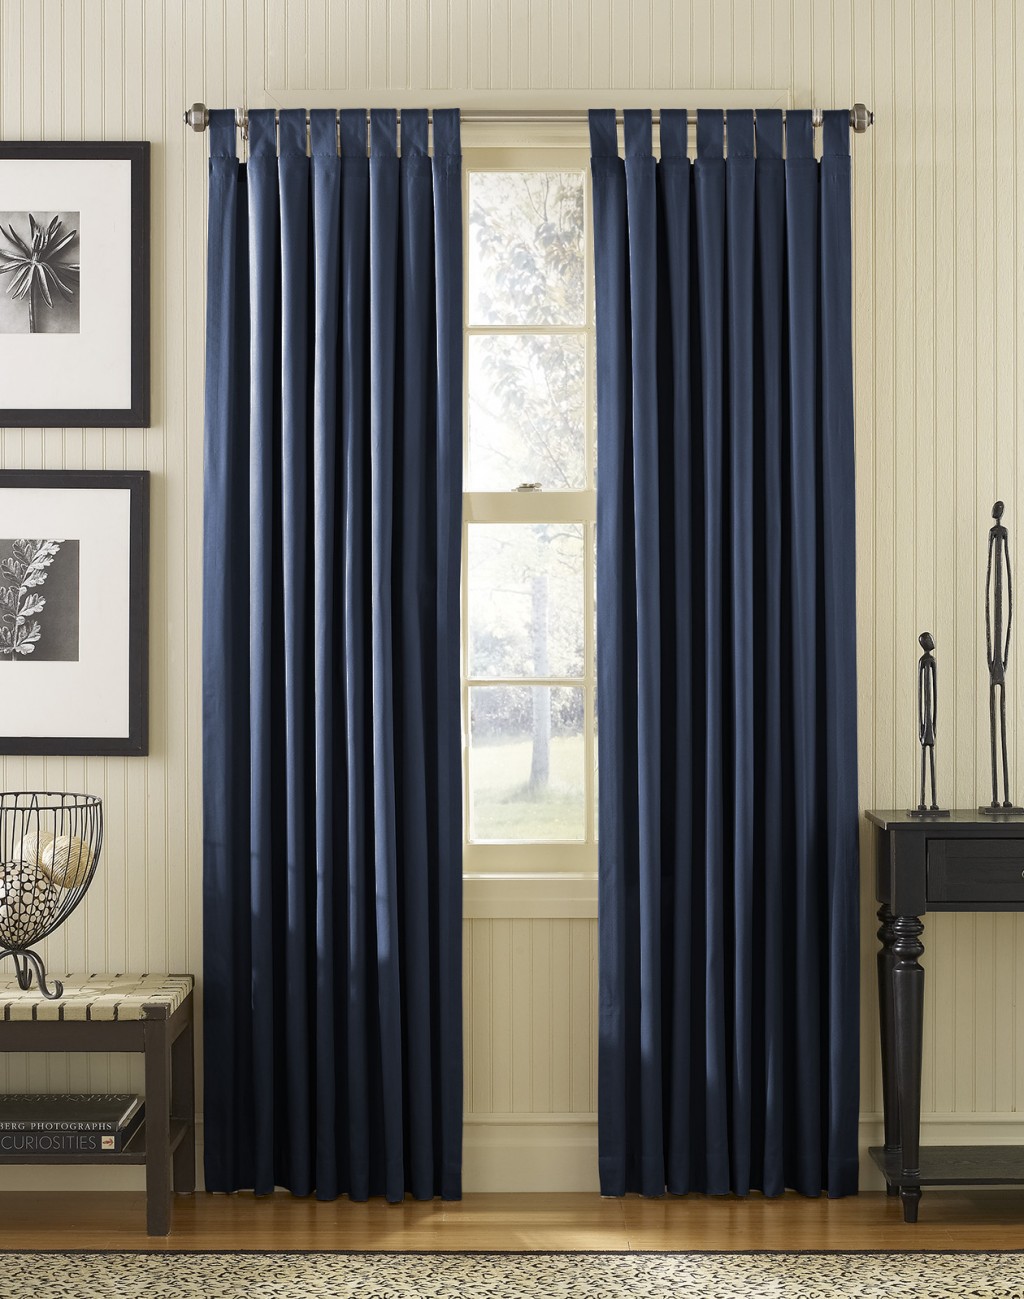 Windows For Curtains in Curtain